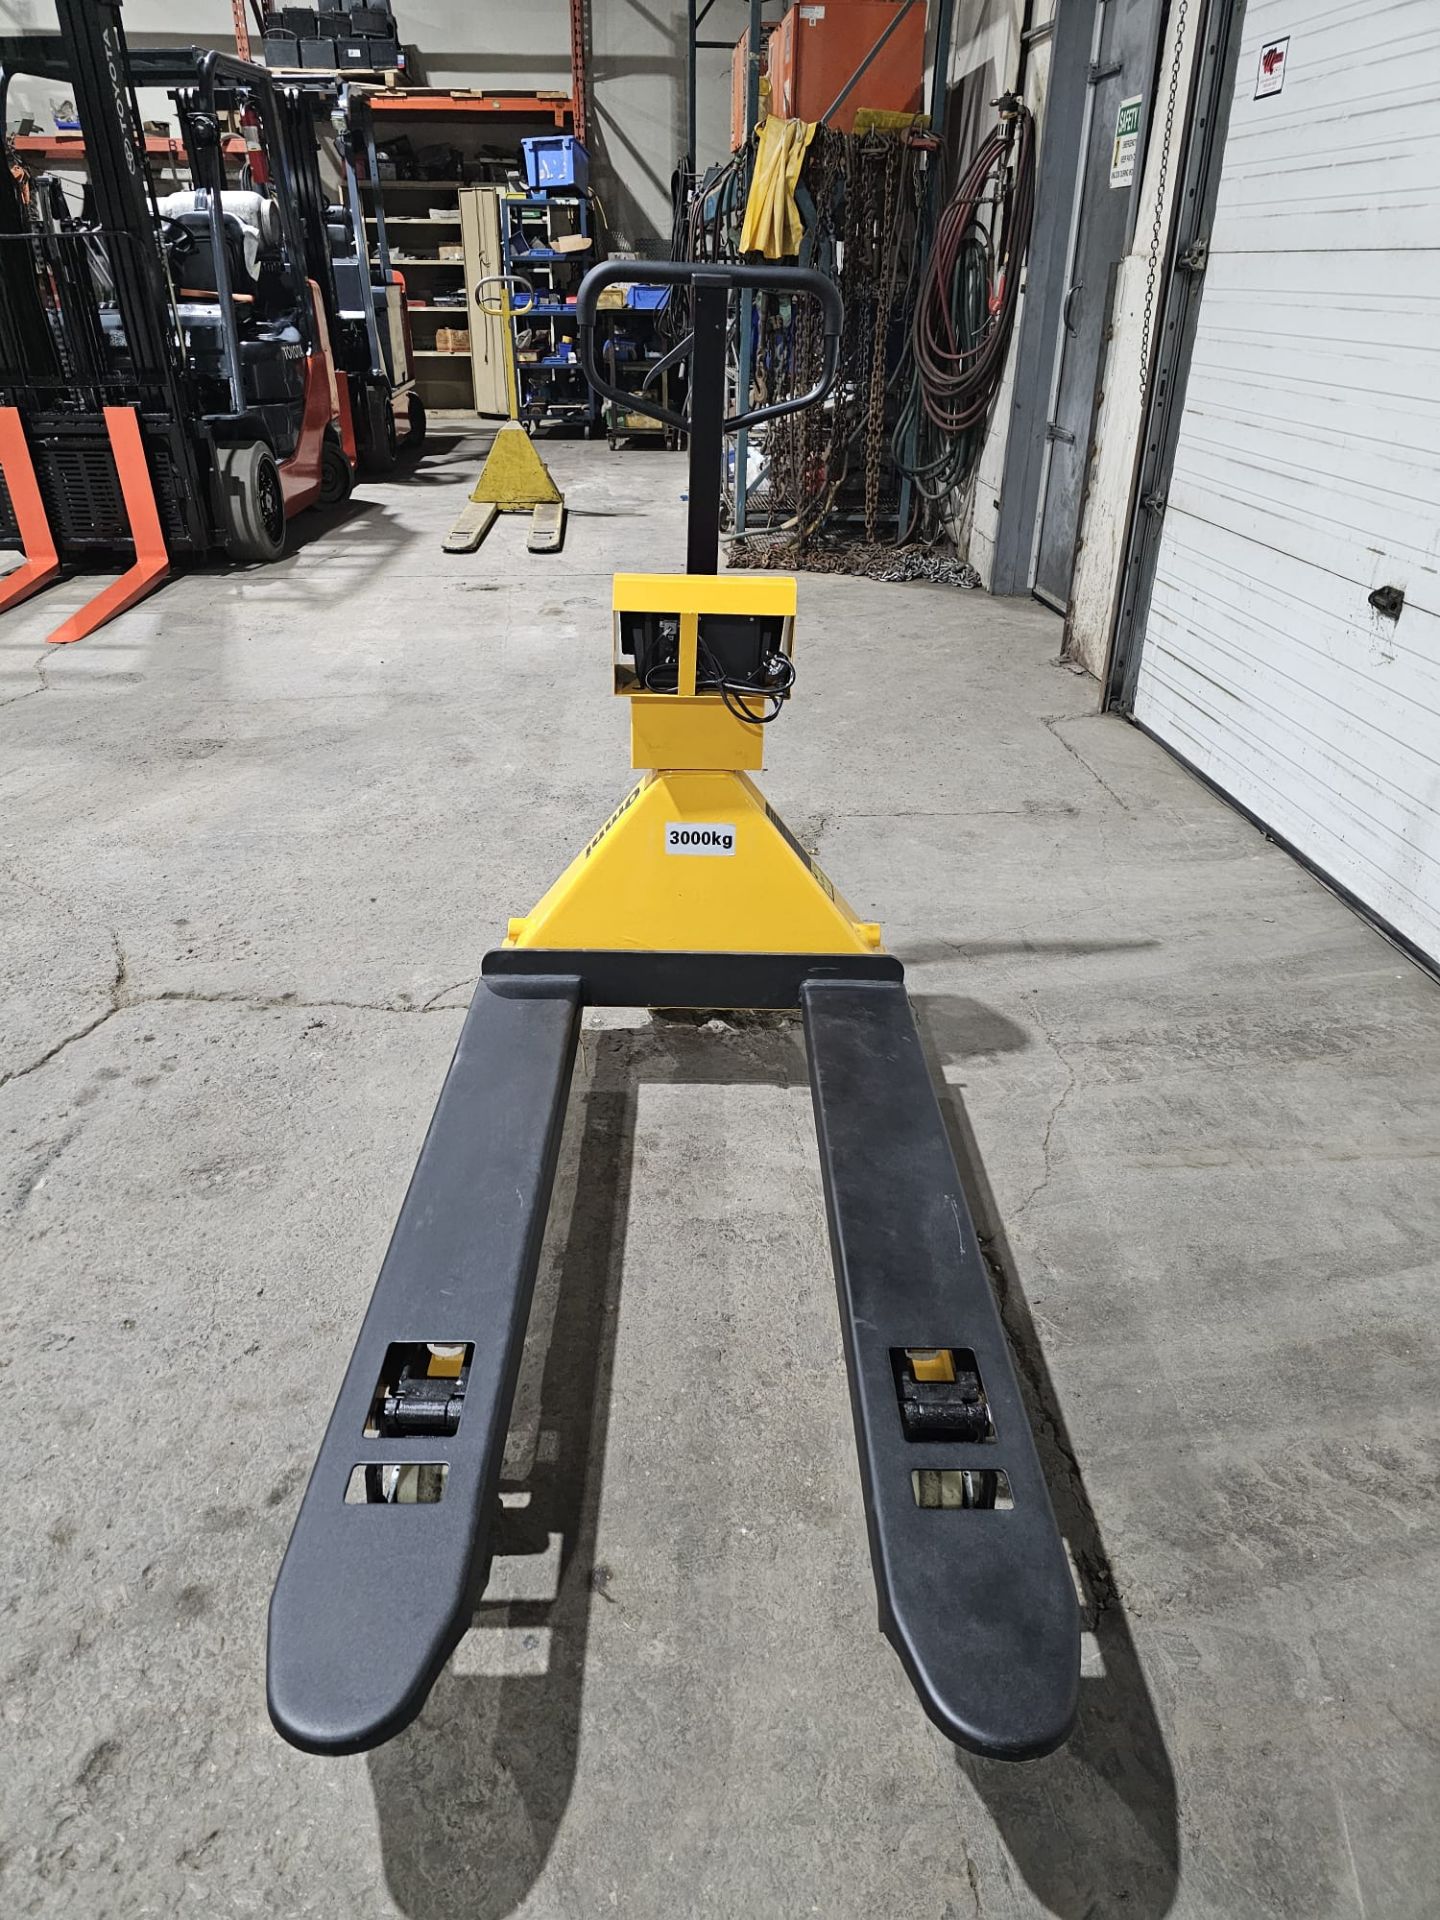 Brand New Omni Pallet Truck Walkie 6,000lbs / 3,000kg capacity with Built On Digital Scale & Charger - Image 2 of 5